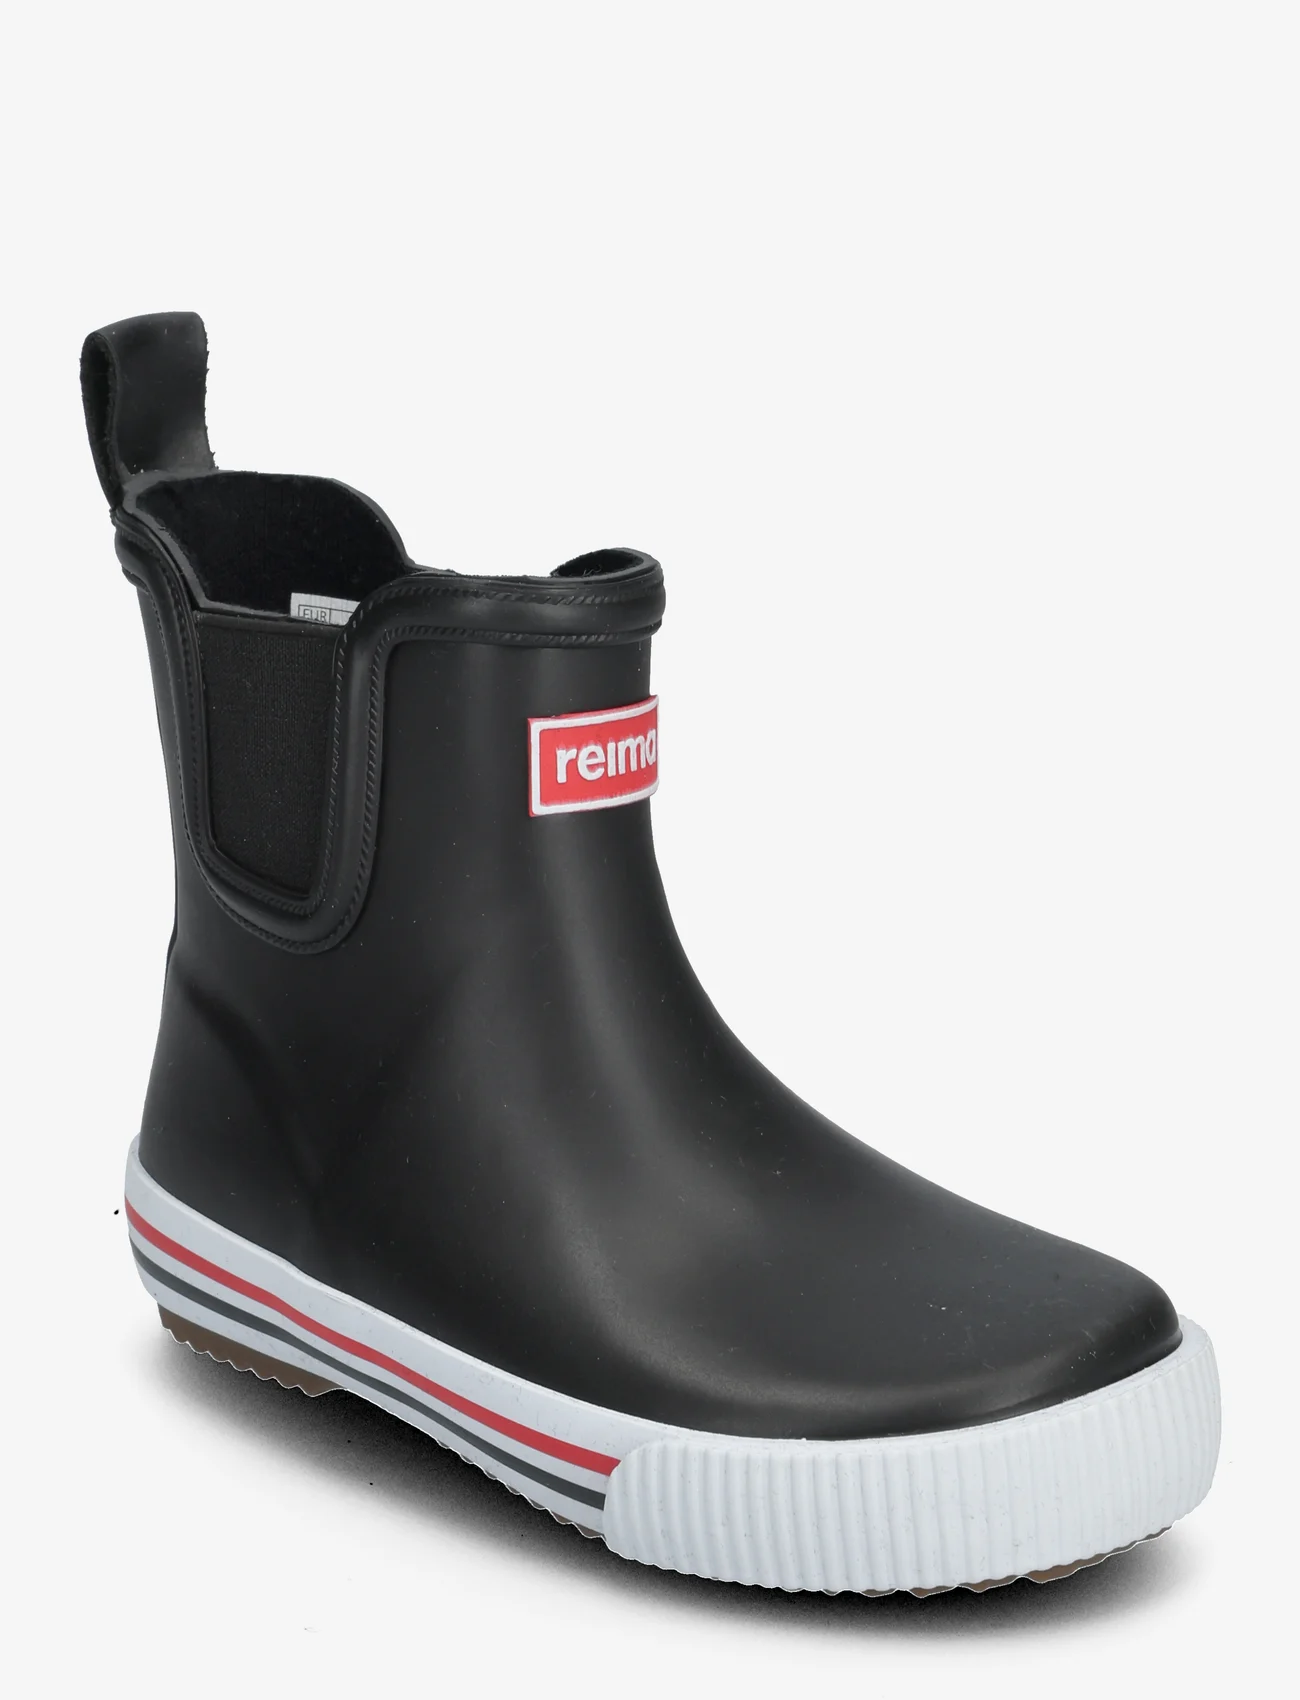 Reima - Rain boots, Ankles - unlined rubberboots - black - 0